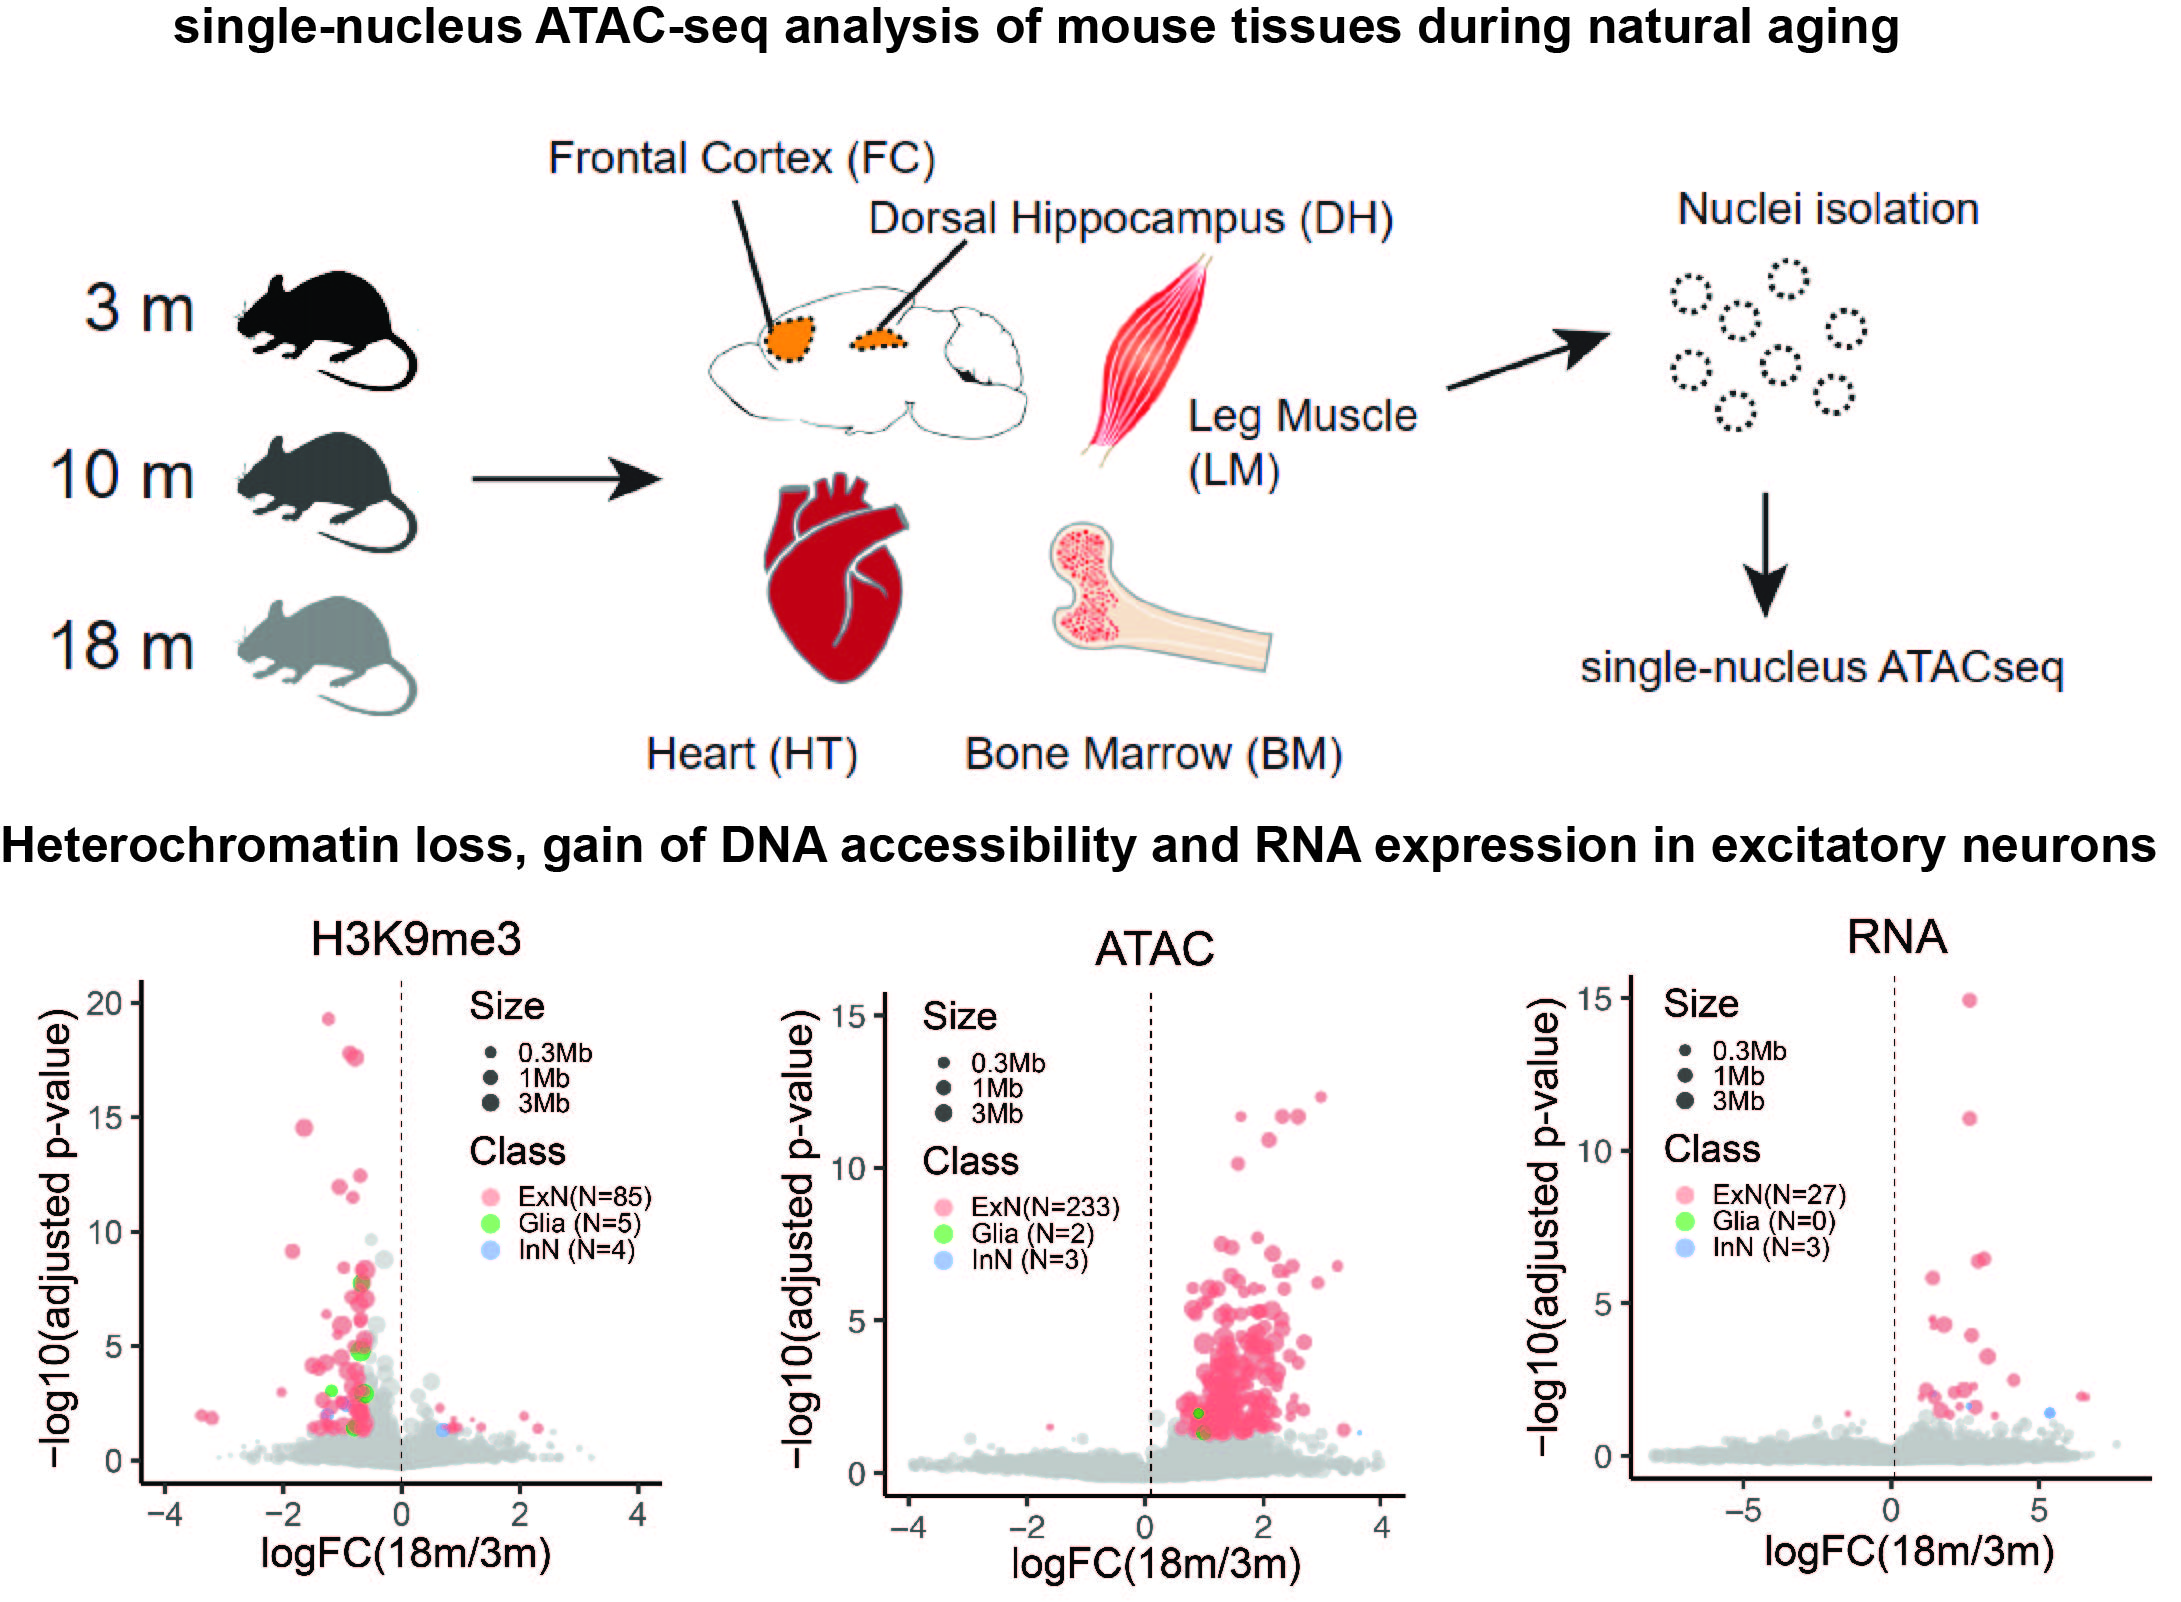 Yanxiao and Luisa's mouse single-cell aging paper published on Cell Research today!